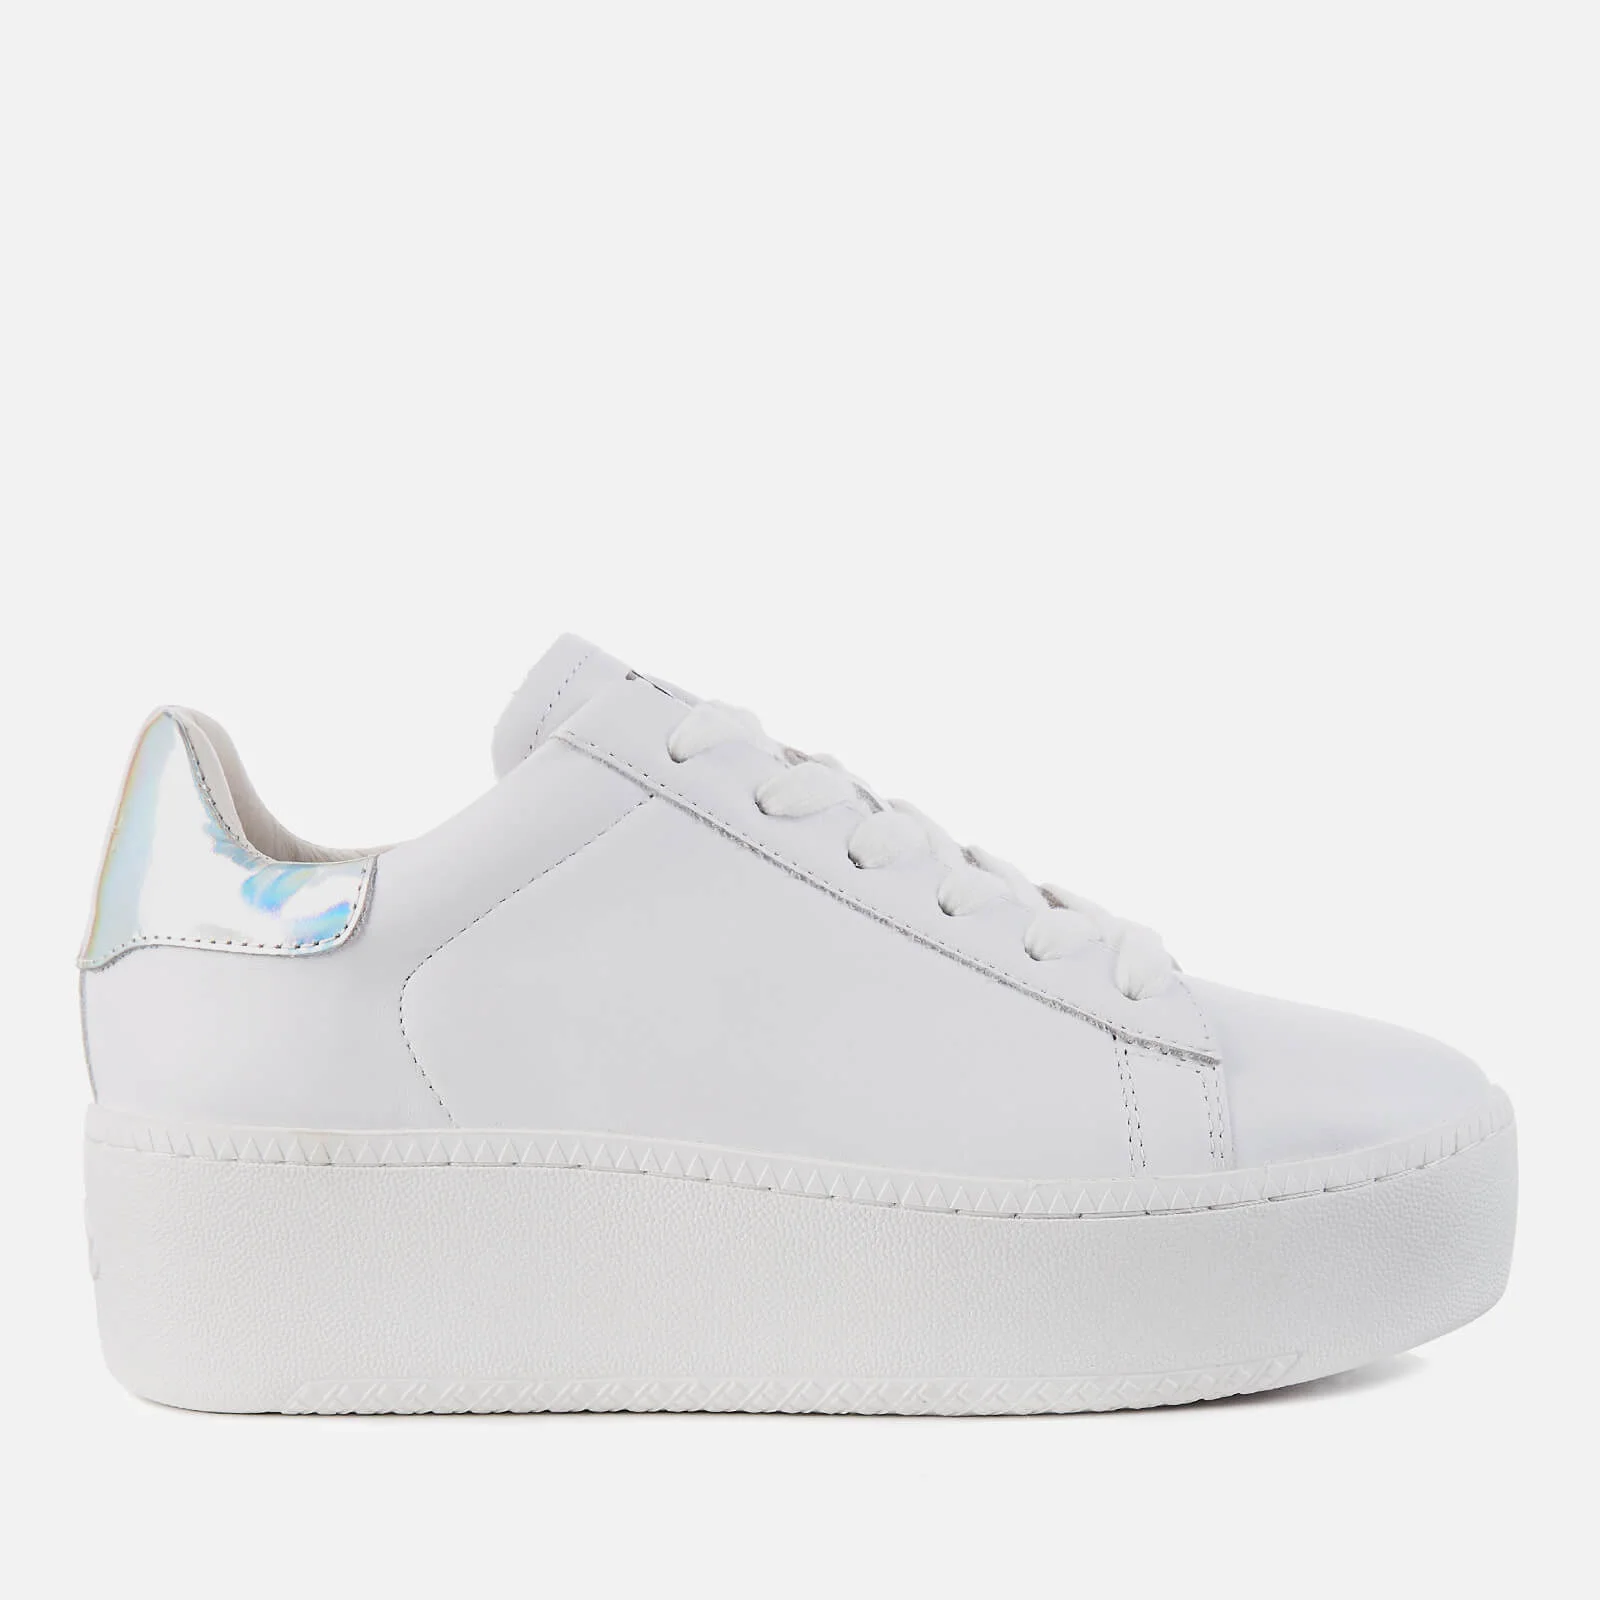 Ash Women's Cult Flatform Trainers - White/Silver Image 1